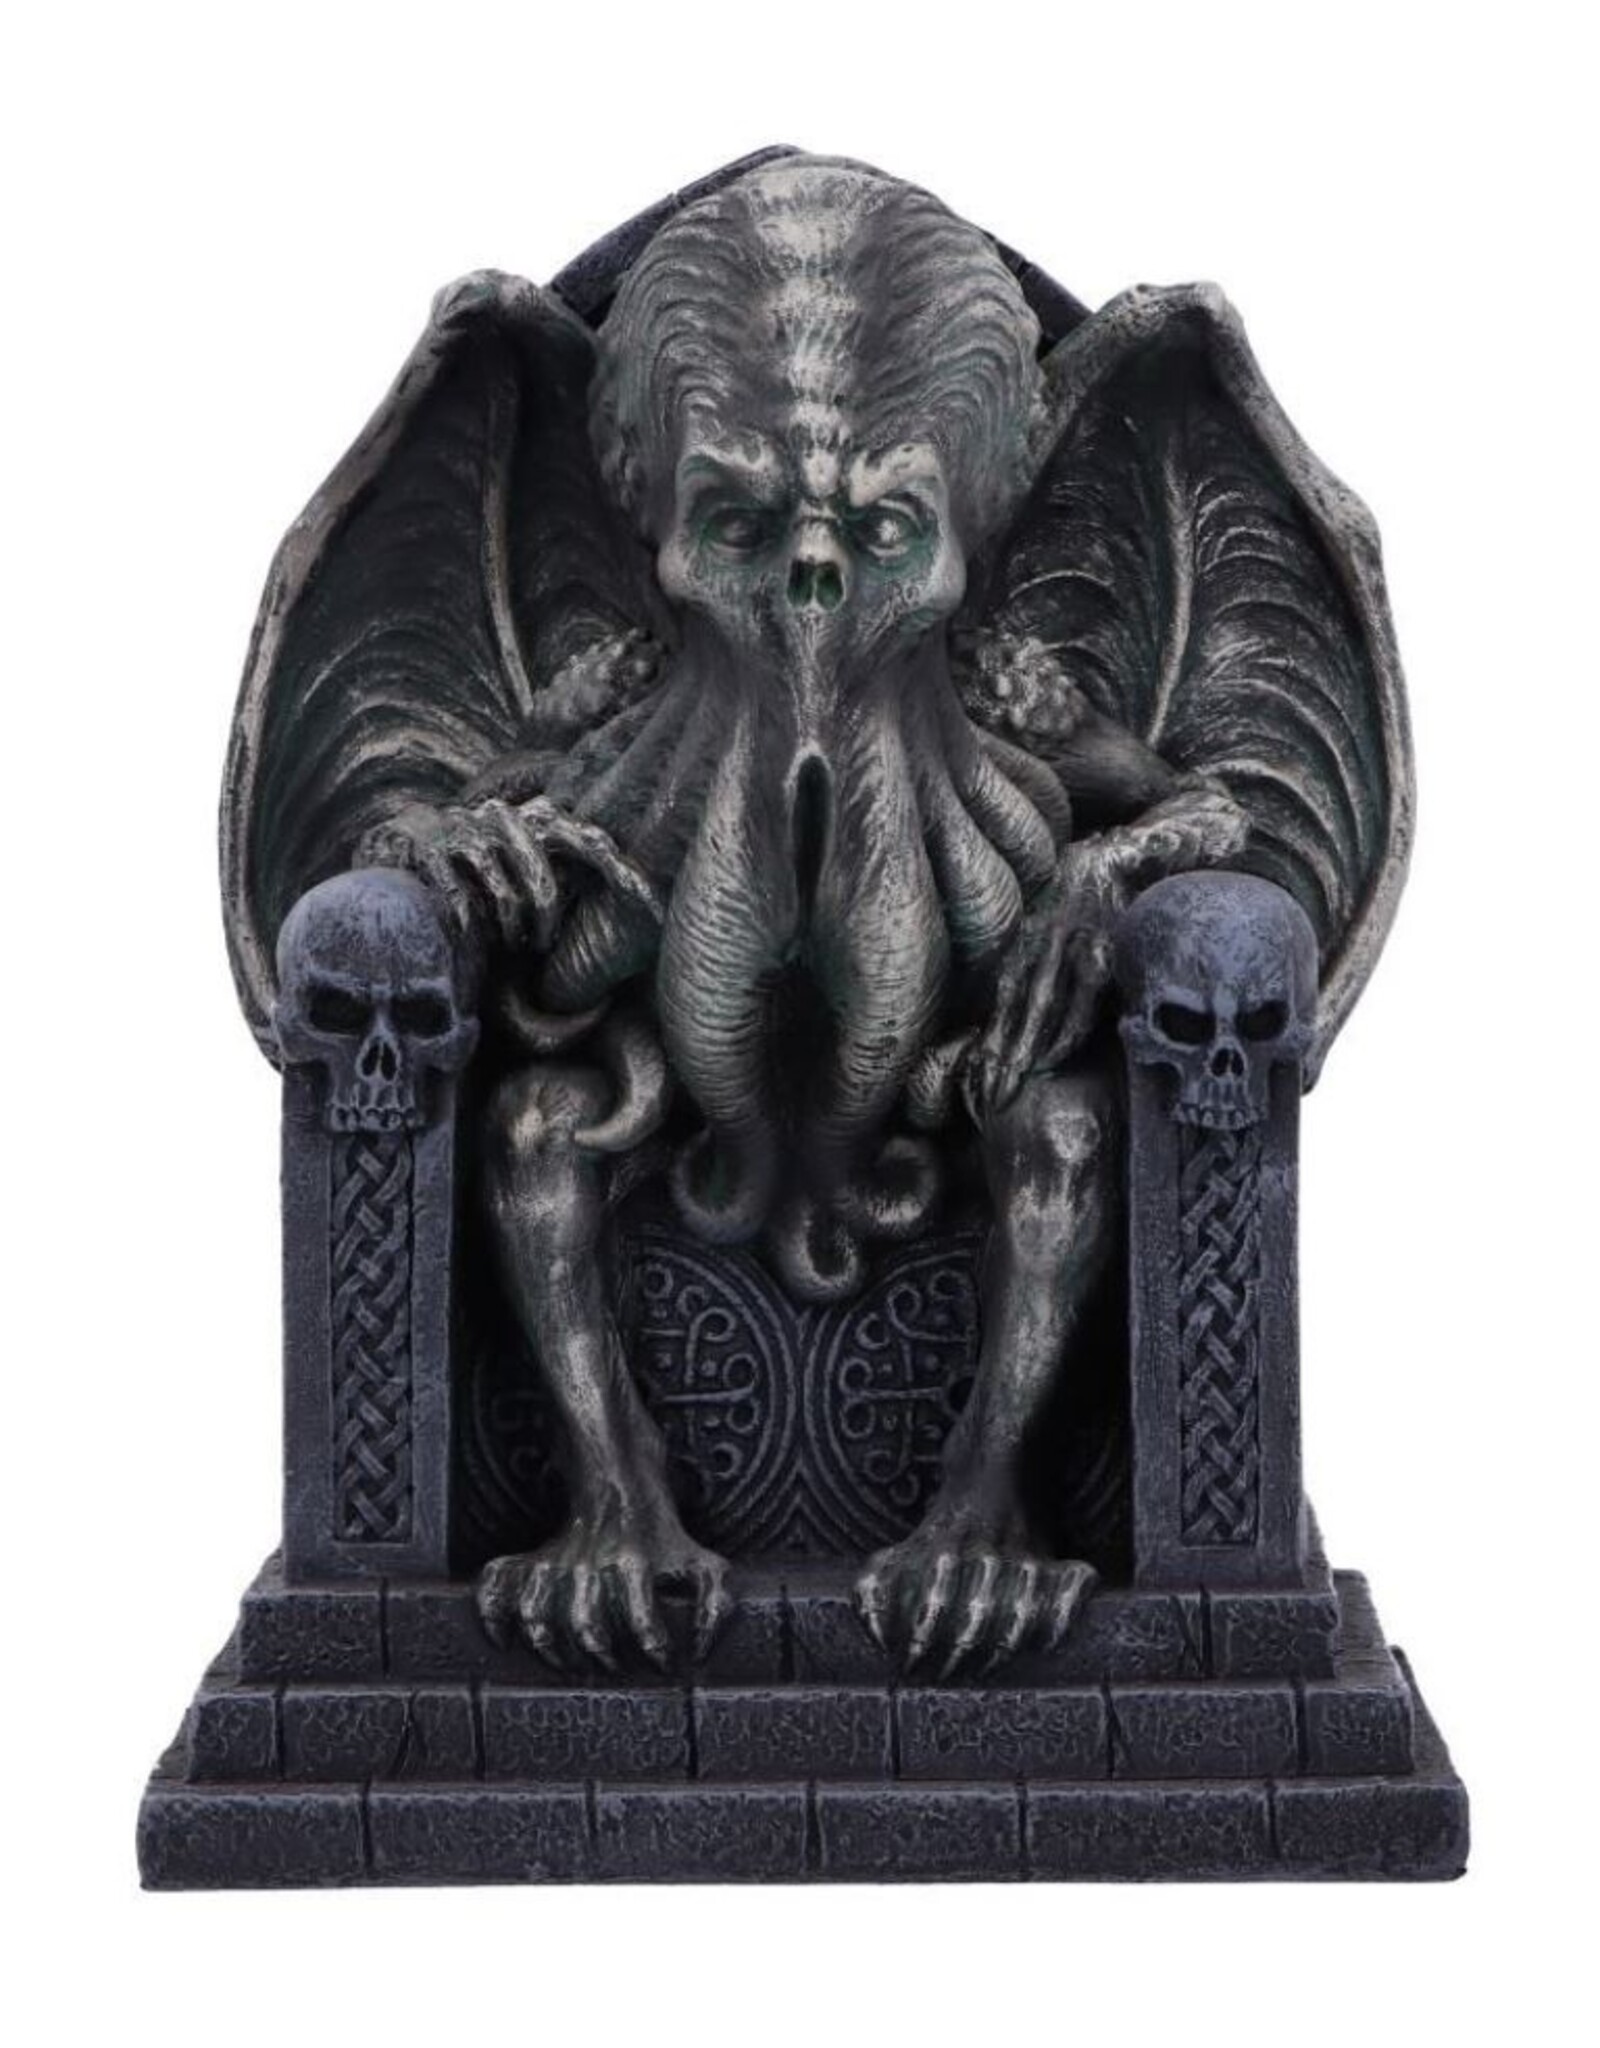 VG Giftware & Lifestyle - Cthulhu's Throne figurine 20cm